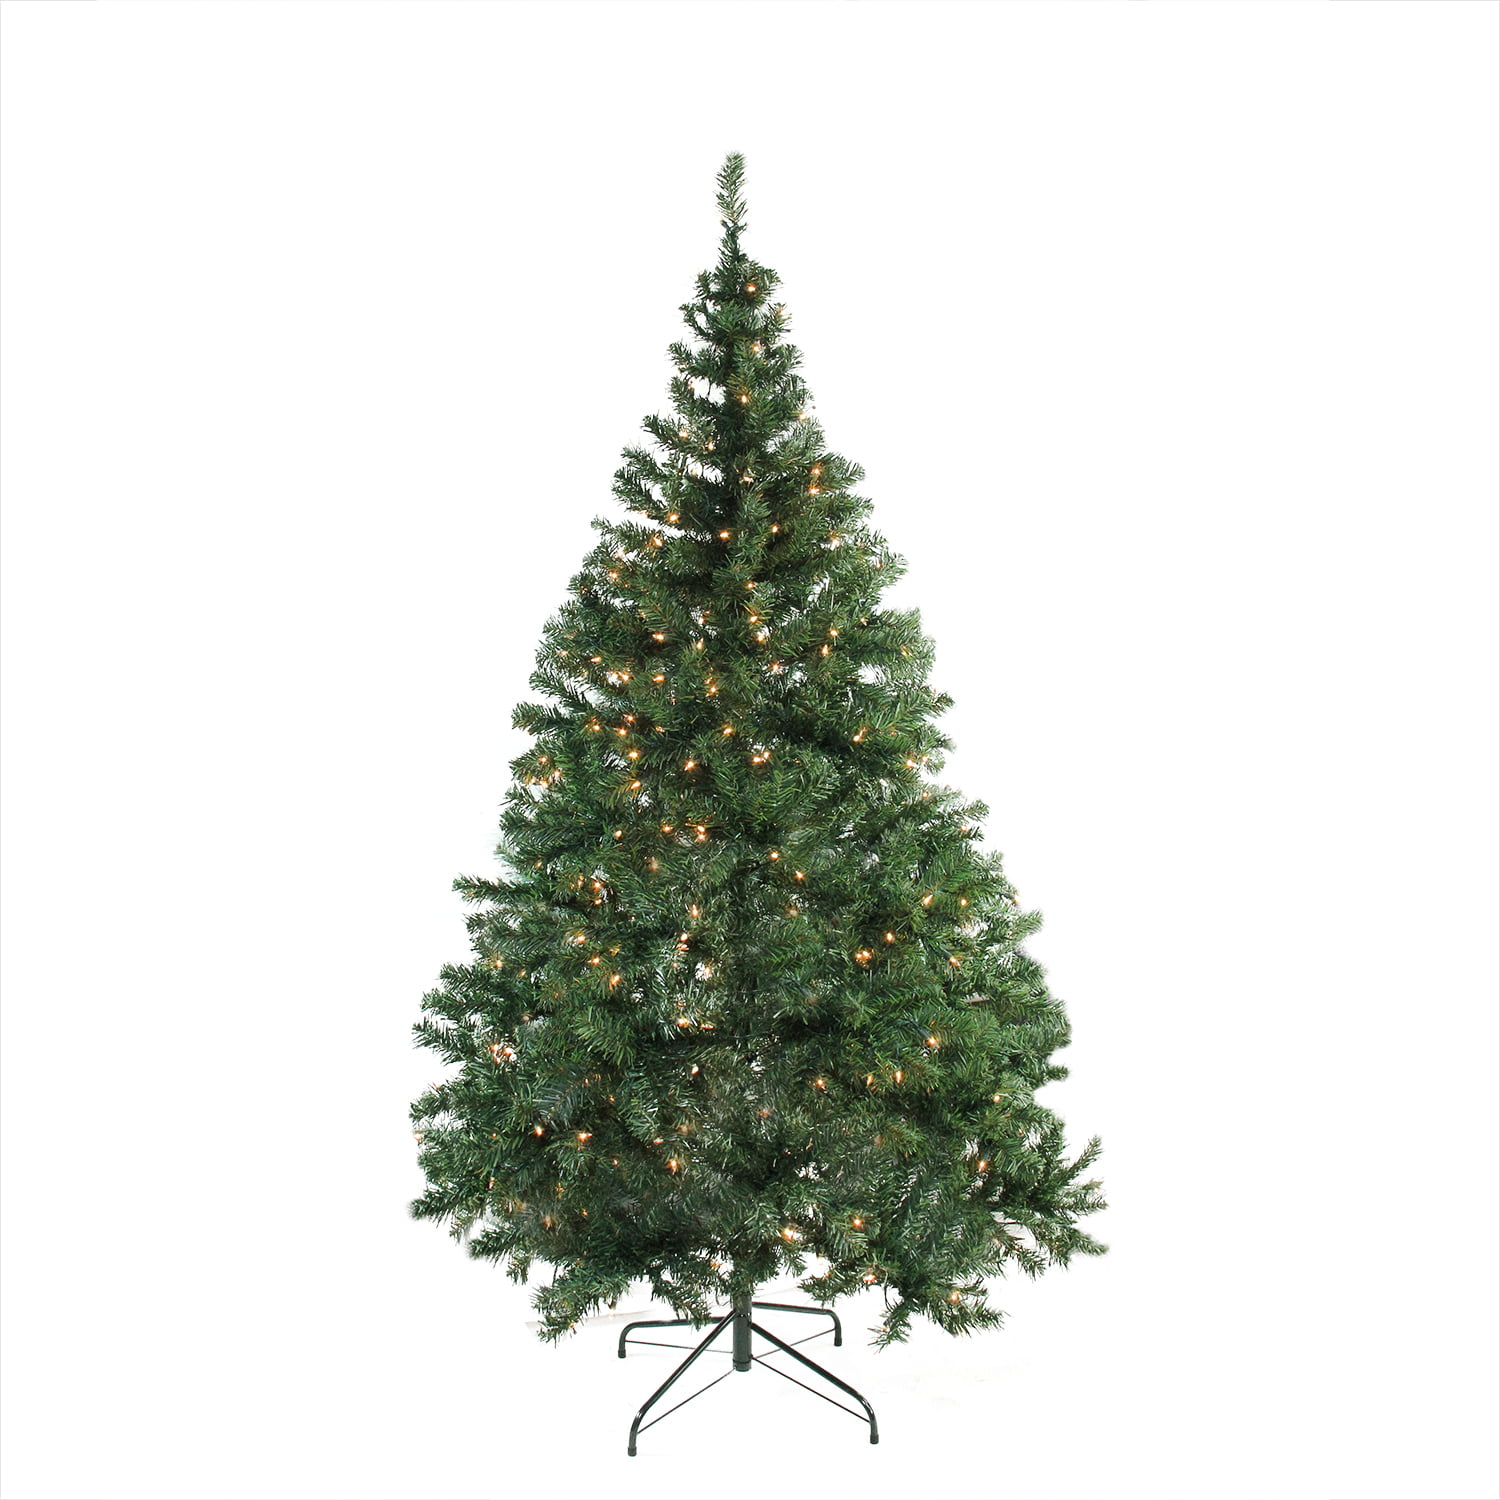 Prelit Christmas Tree Clear Lights 3 Piece easy Assembly McLeland Design 7ft 